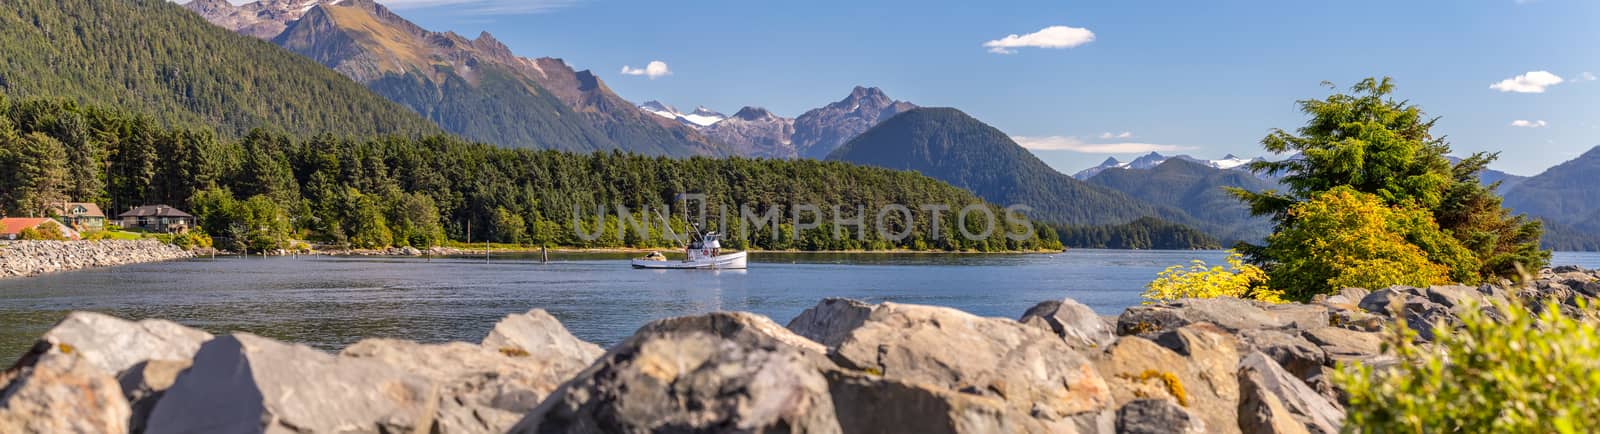 Scenic panoramic shot of harbour in Sitka, AK by DamantisZ